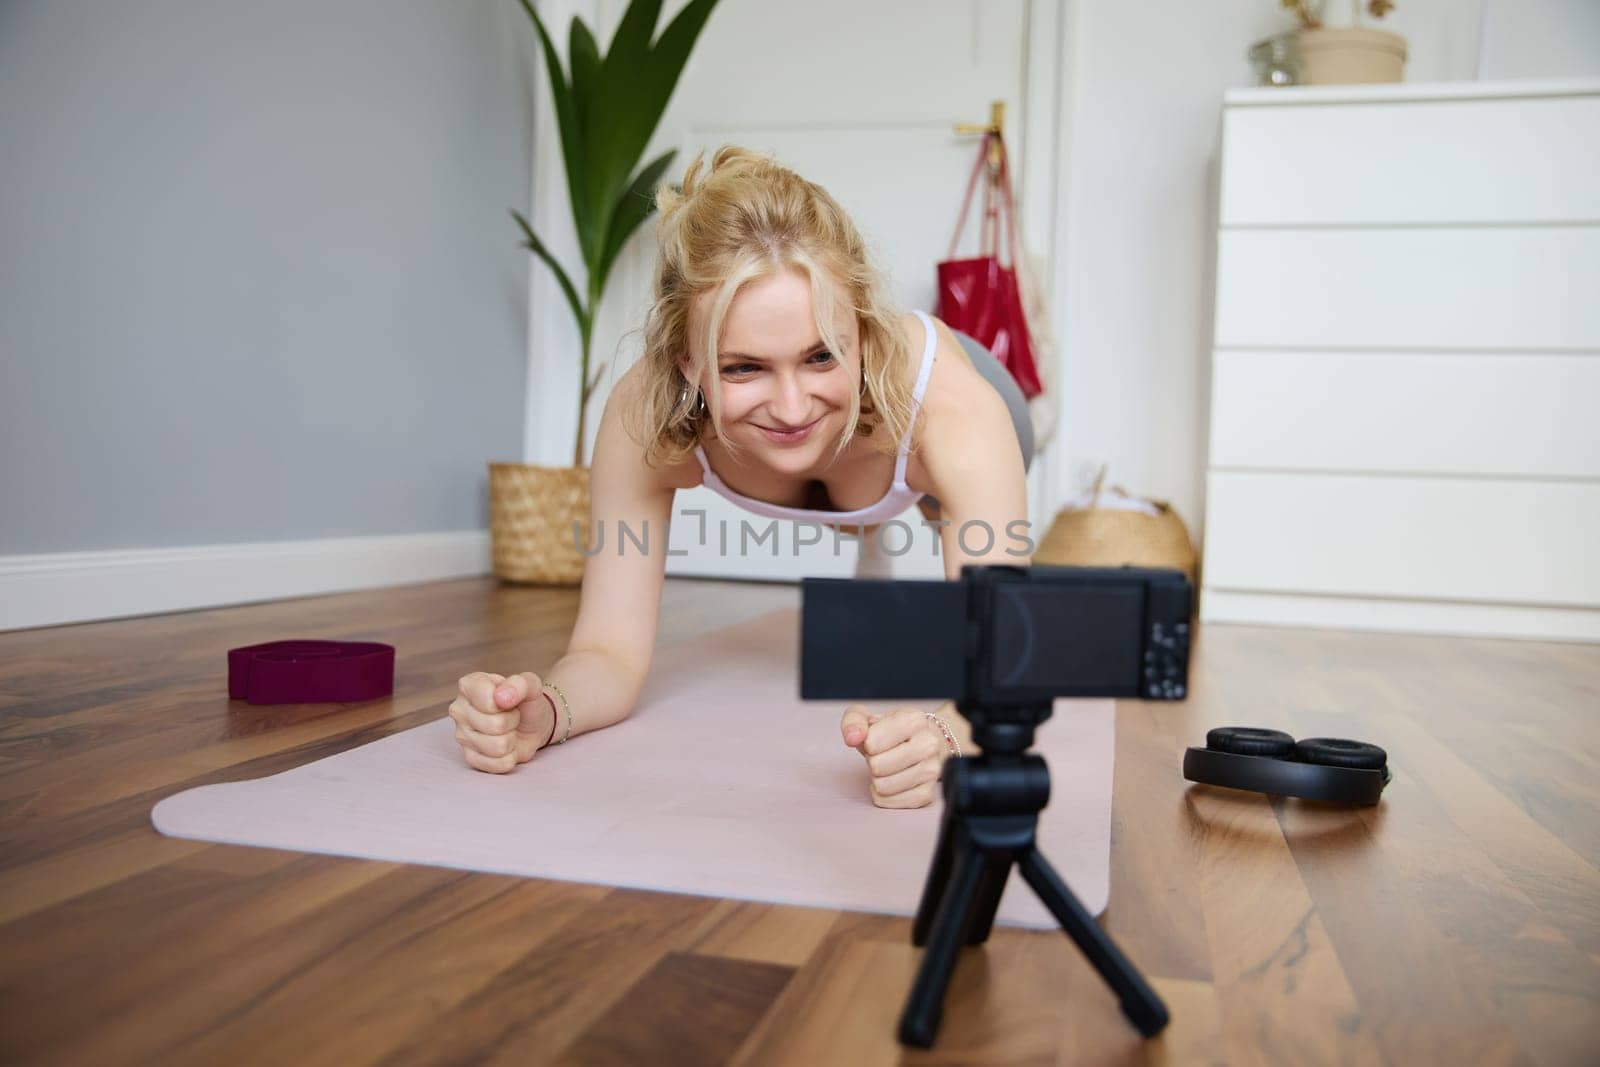 Portrait of young sporty vlogger, fitness instructor standing in plank on rubber yoga mat, recording video of herself doing workout at home.